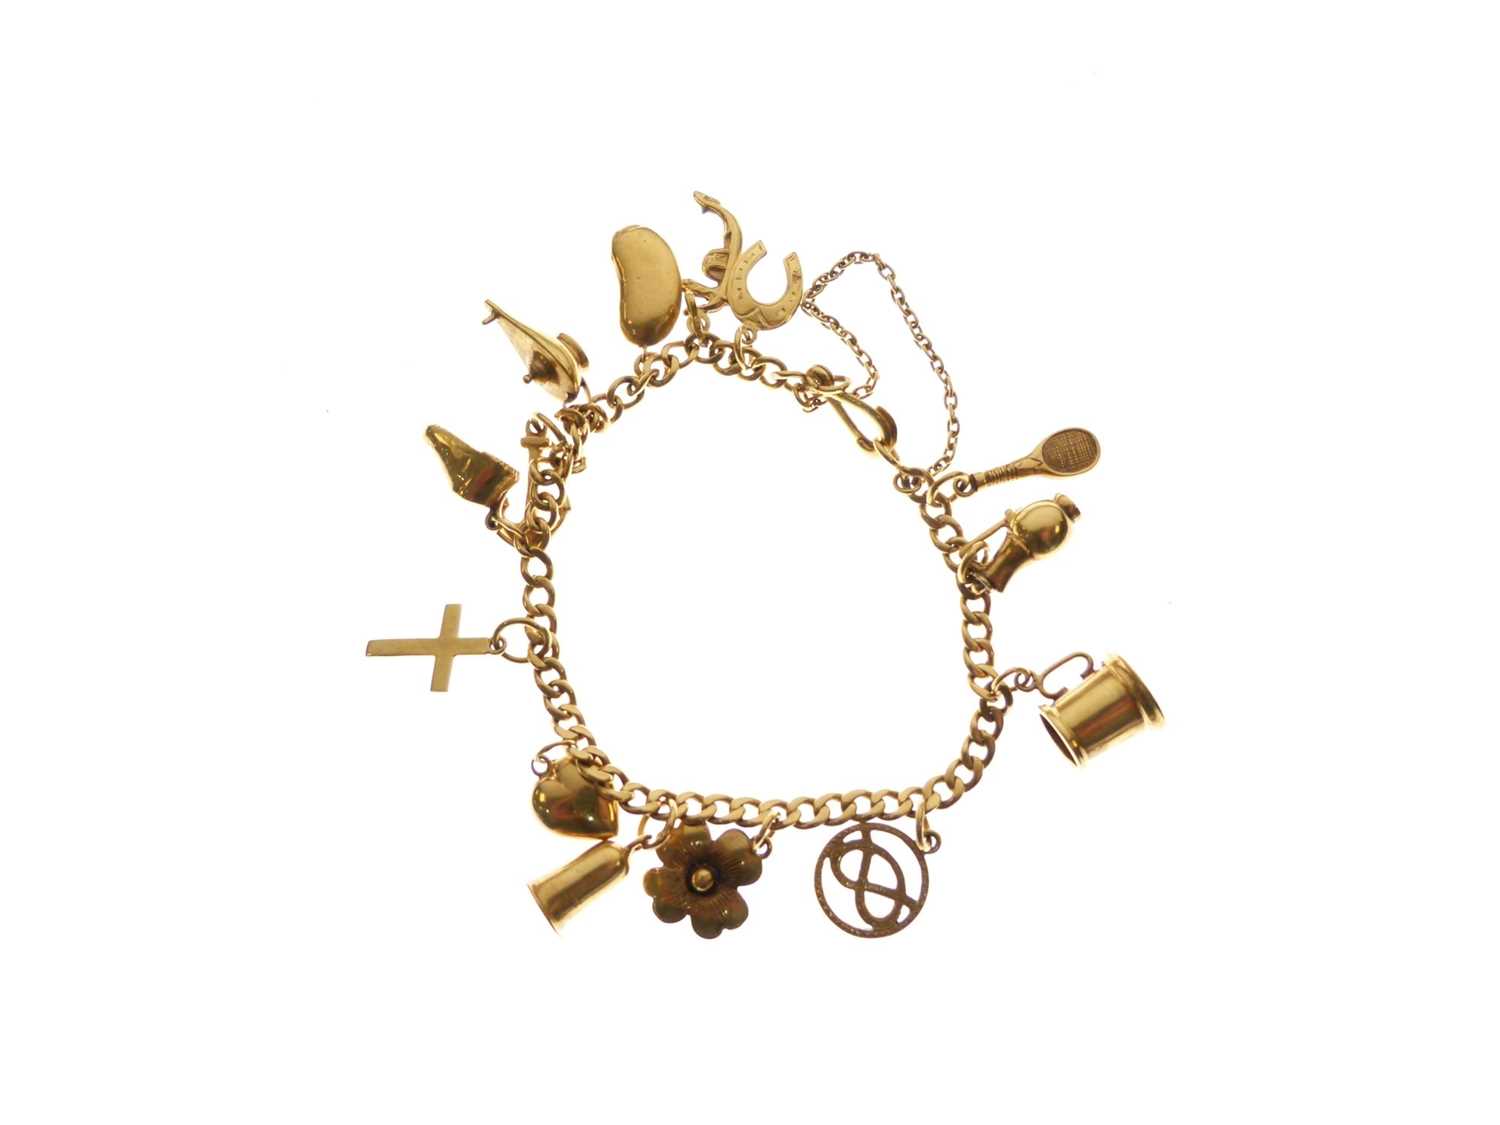 Yellow metal bracelet with various charms attached - Image 7 of 7